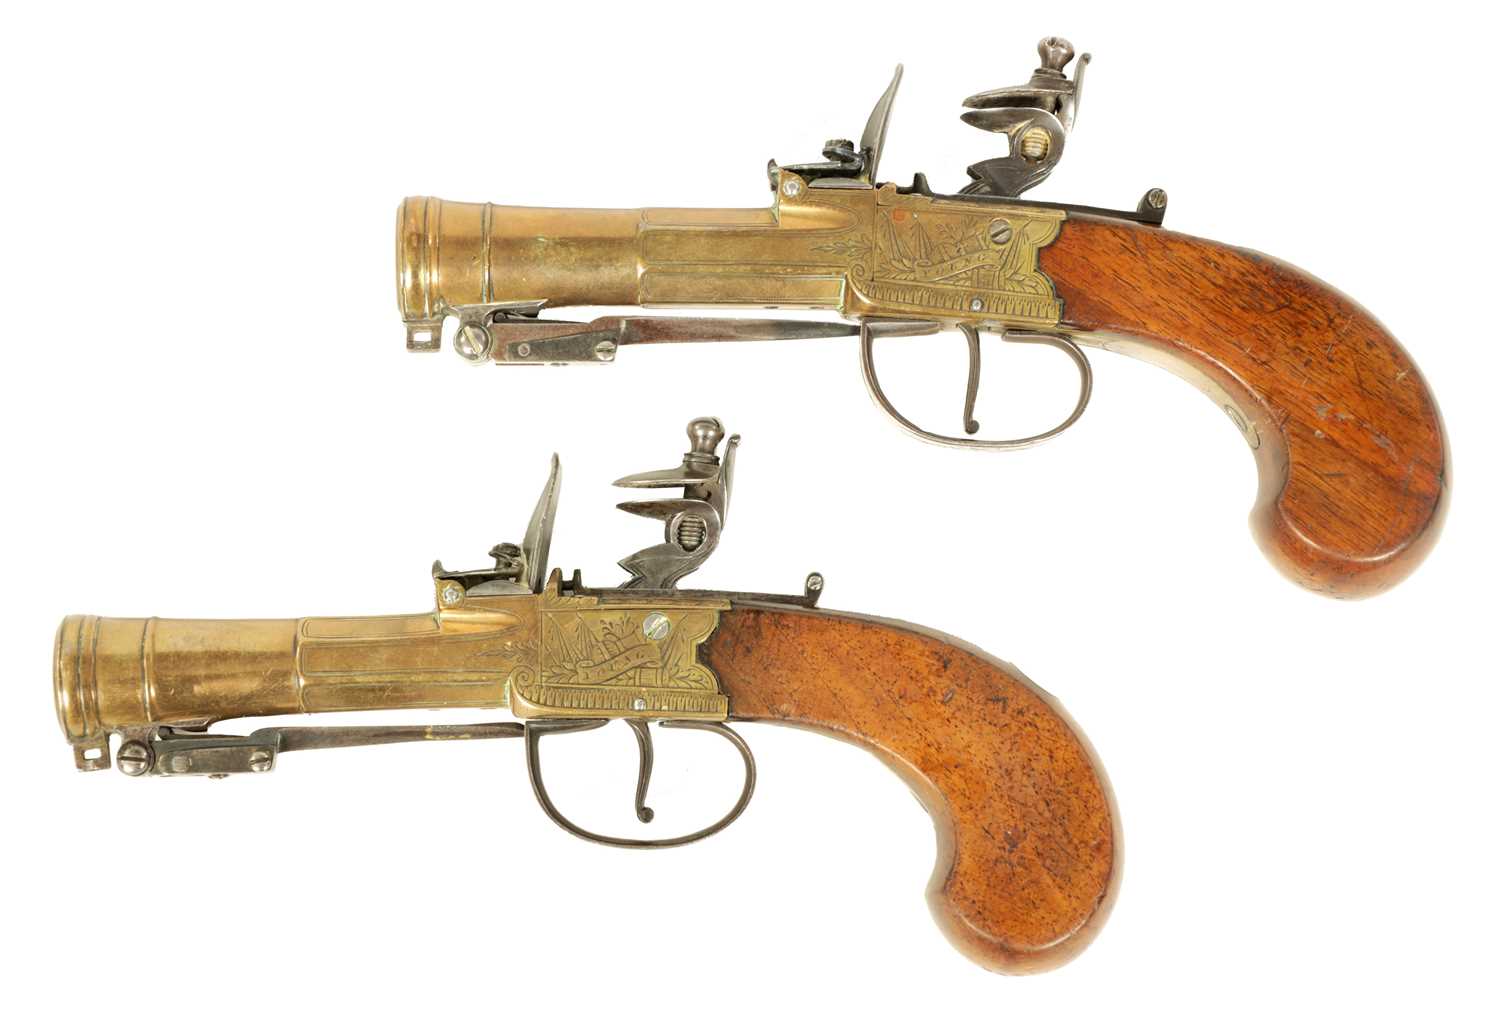 Lot 679 - A RARE PAIR OF EARLY 19TH CENTURY FLINTLOCK BOX-LOCK BLUNDERBUSS-PISTOLS WITH UNDER SPRING BAYONETS BY YOUNG